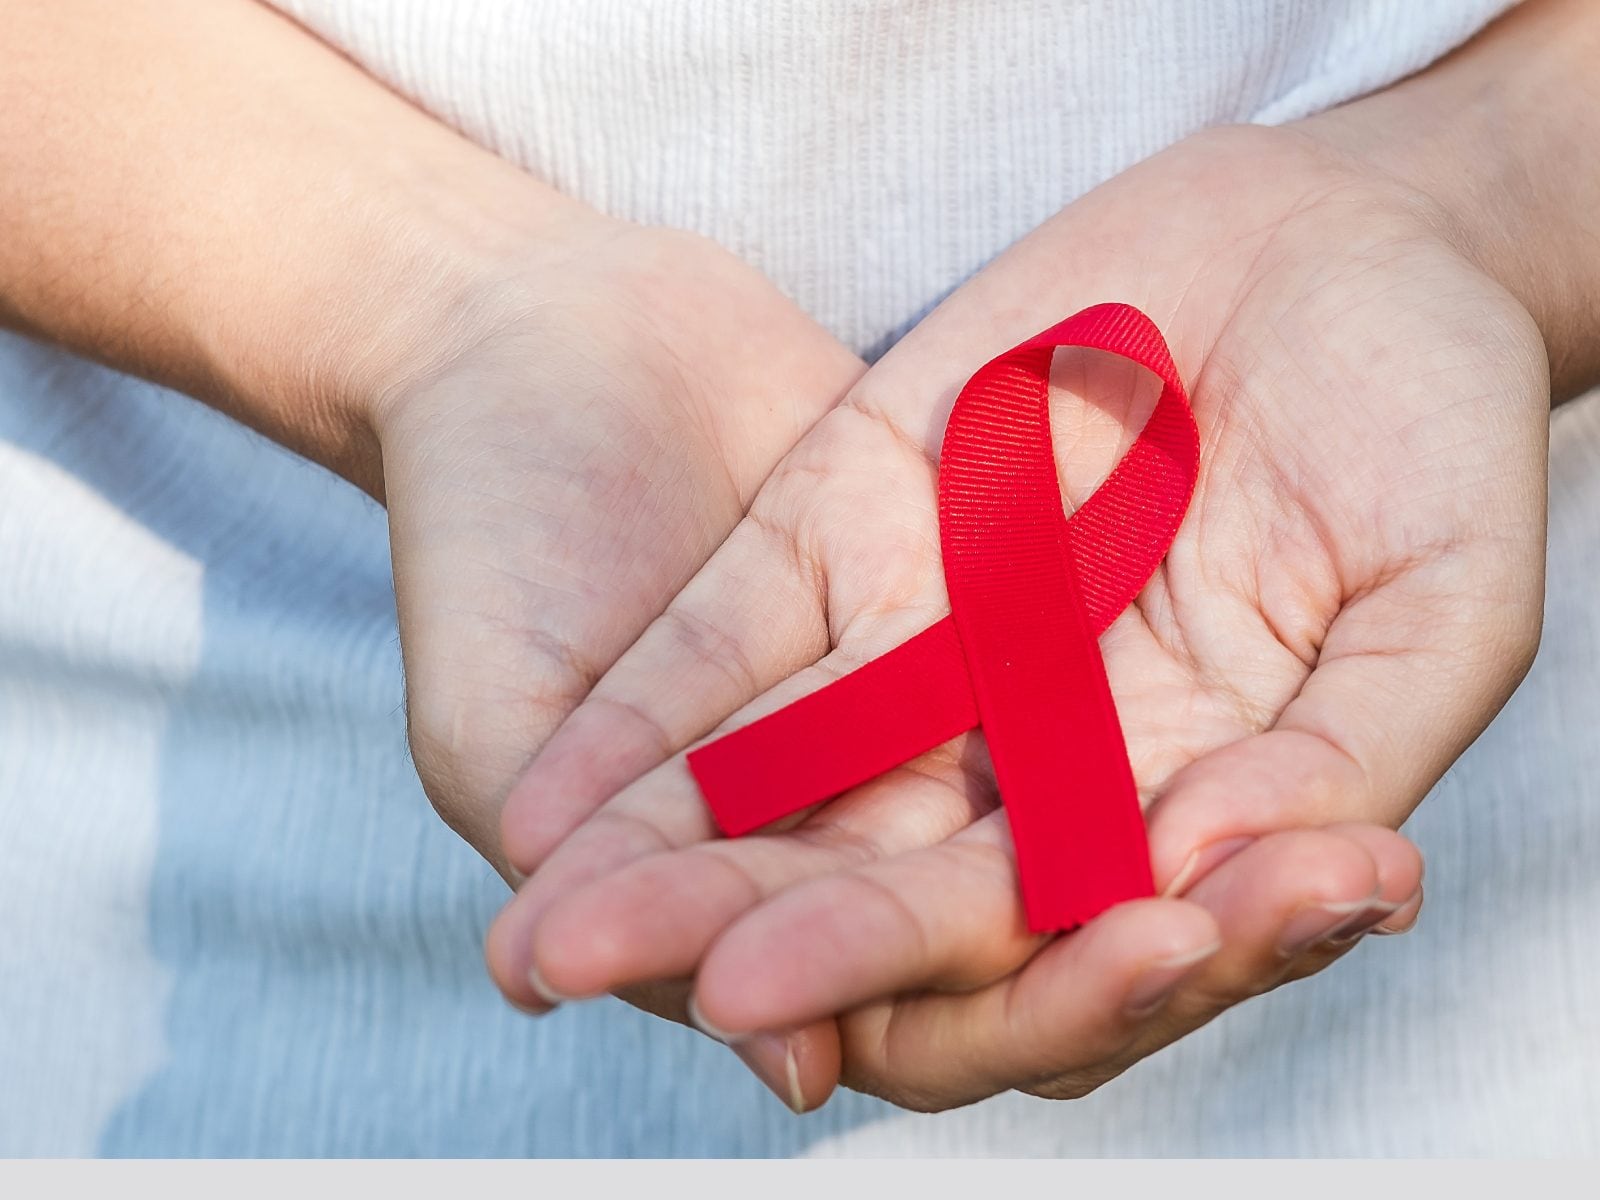 AIDS Day 2022: What Does The Red Ribbon Symbolise? - News18